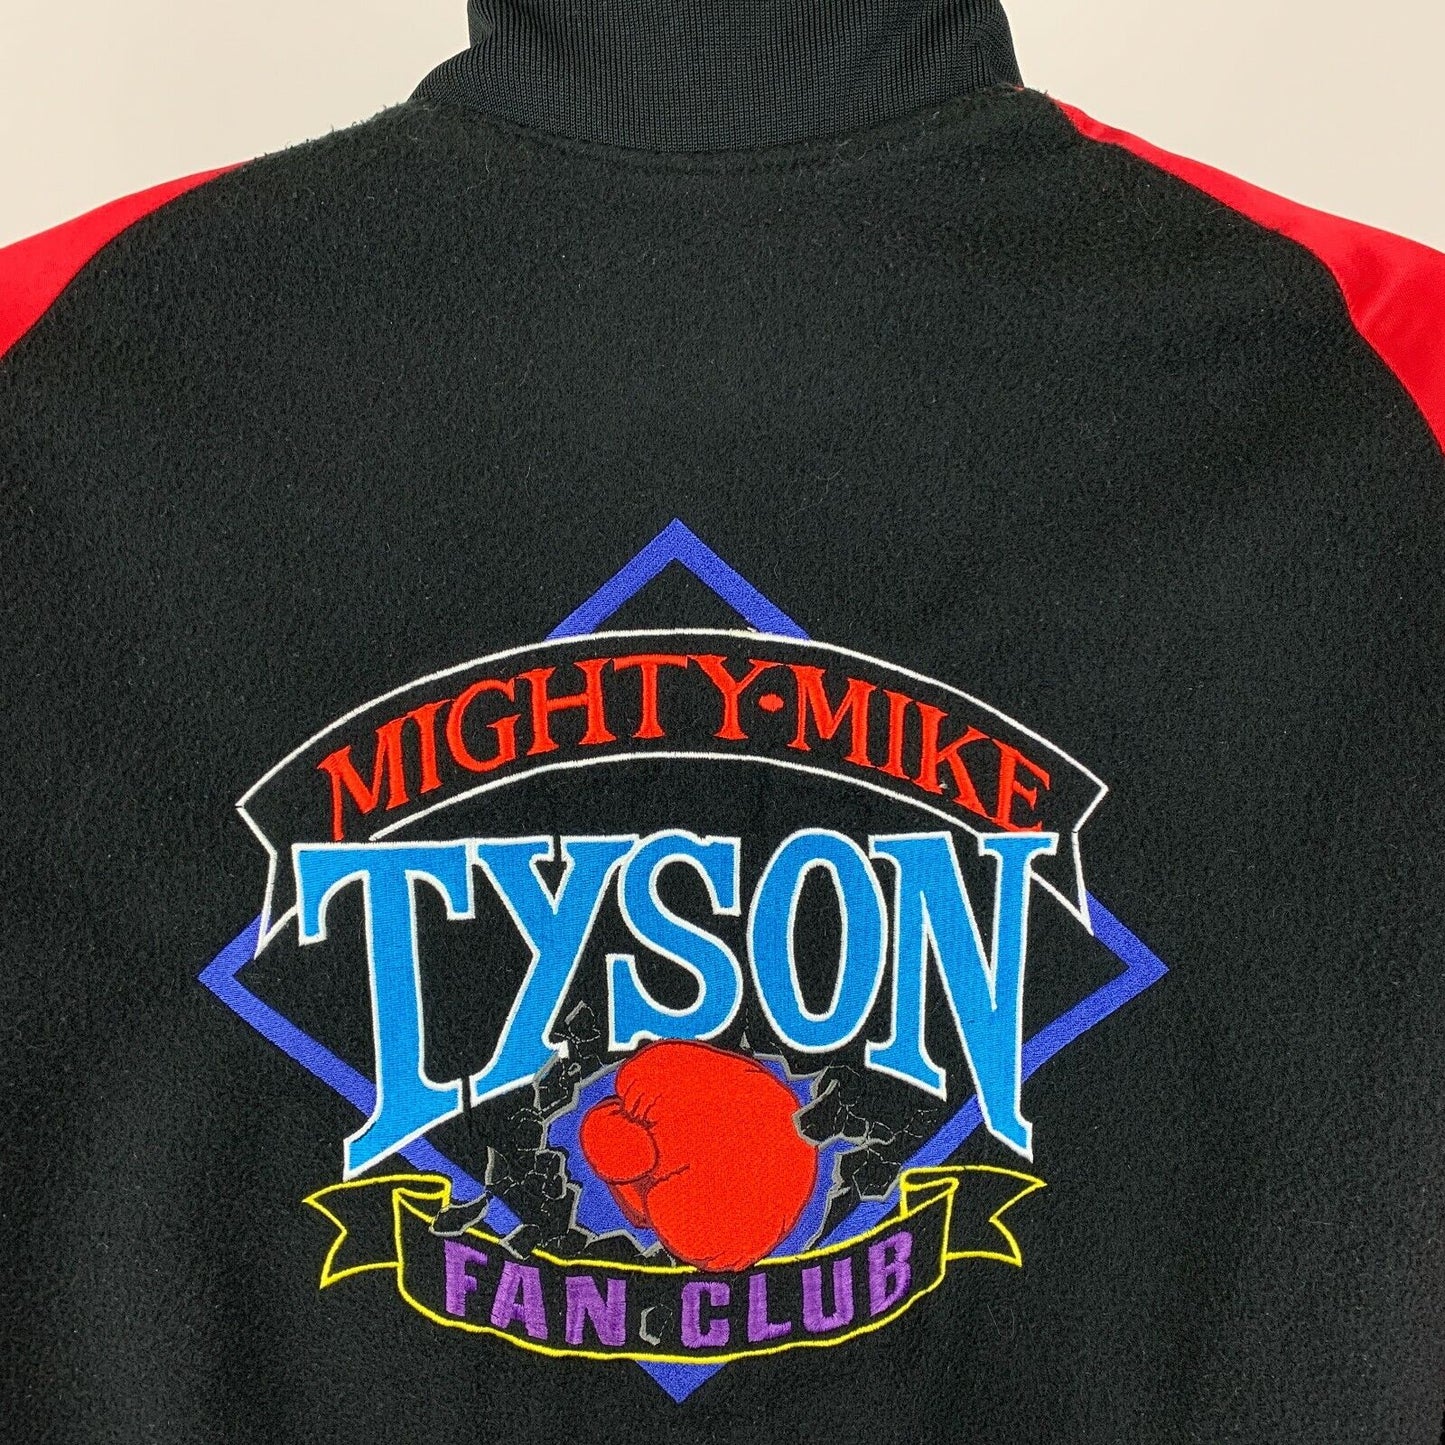 Mighty Mike Tyson Fan Club Vintage 90s Jacket XL X-Large Boxing Boxer Mens Black